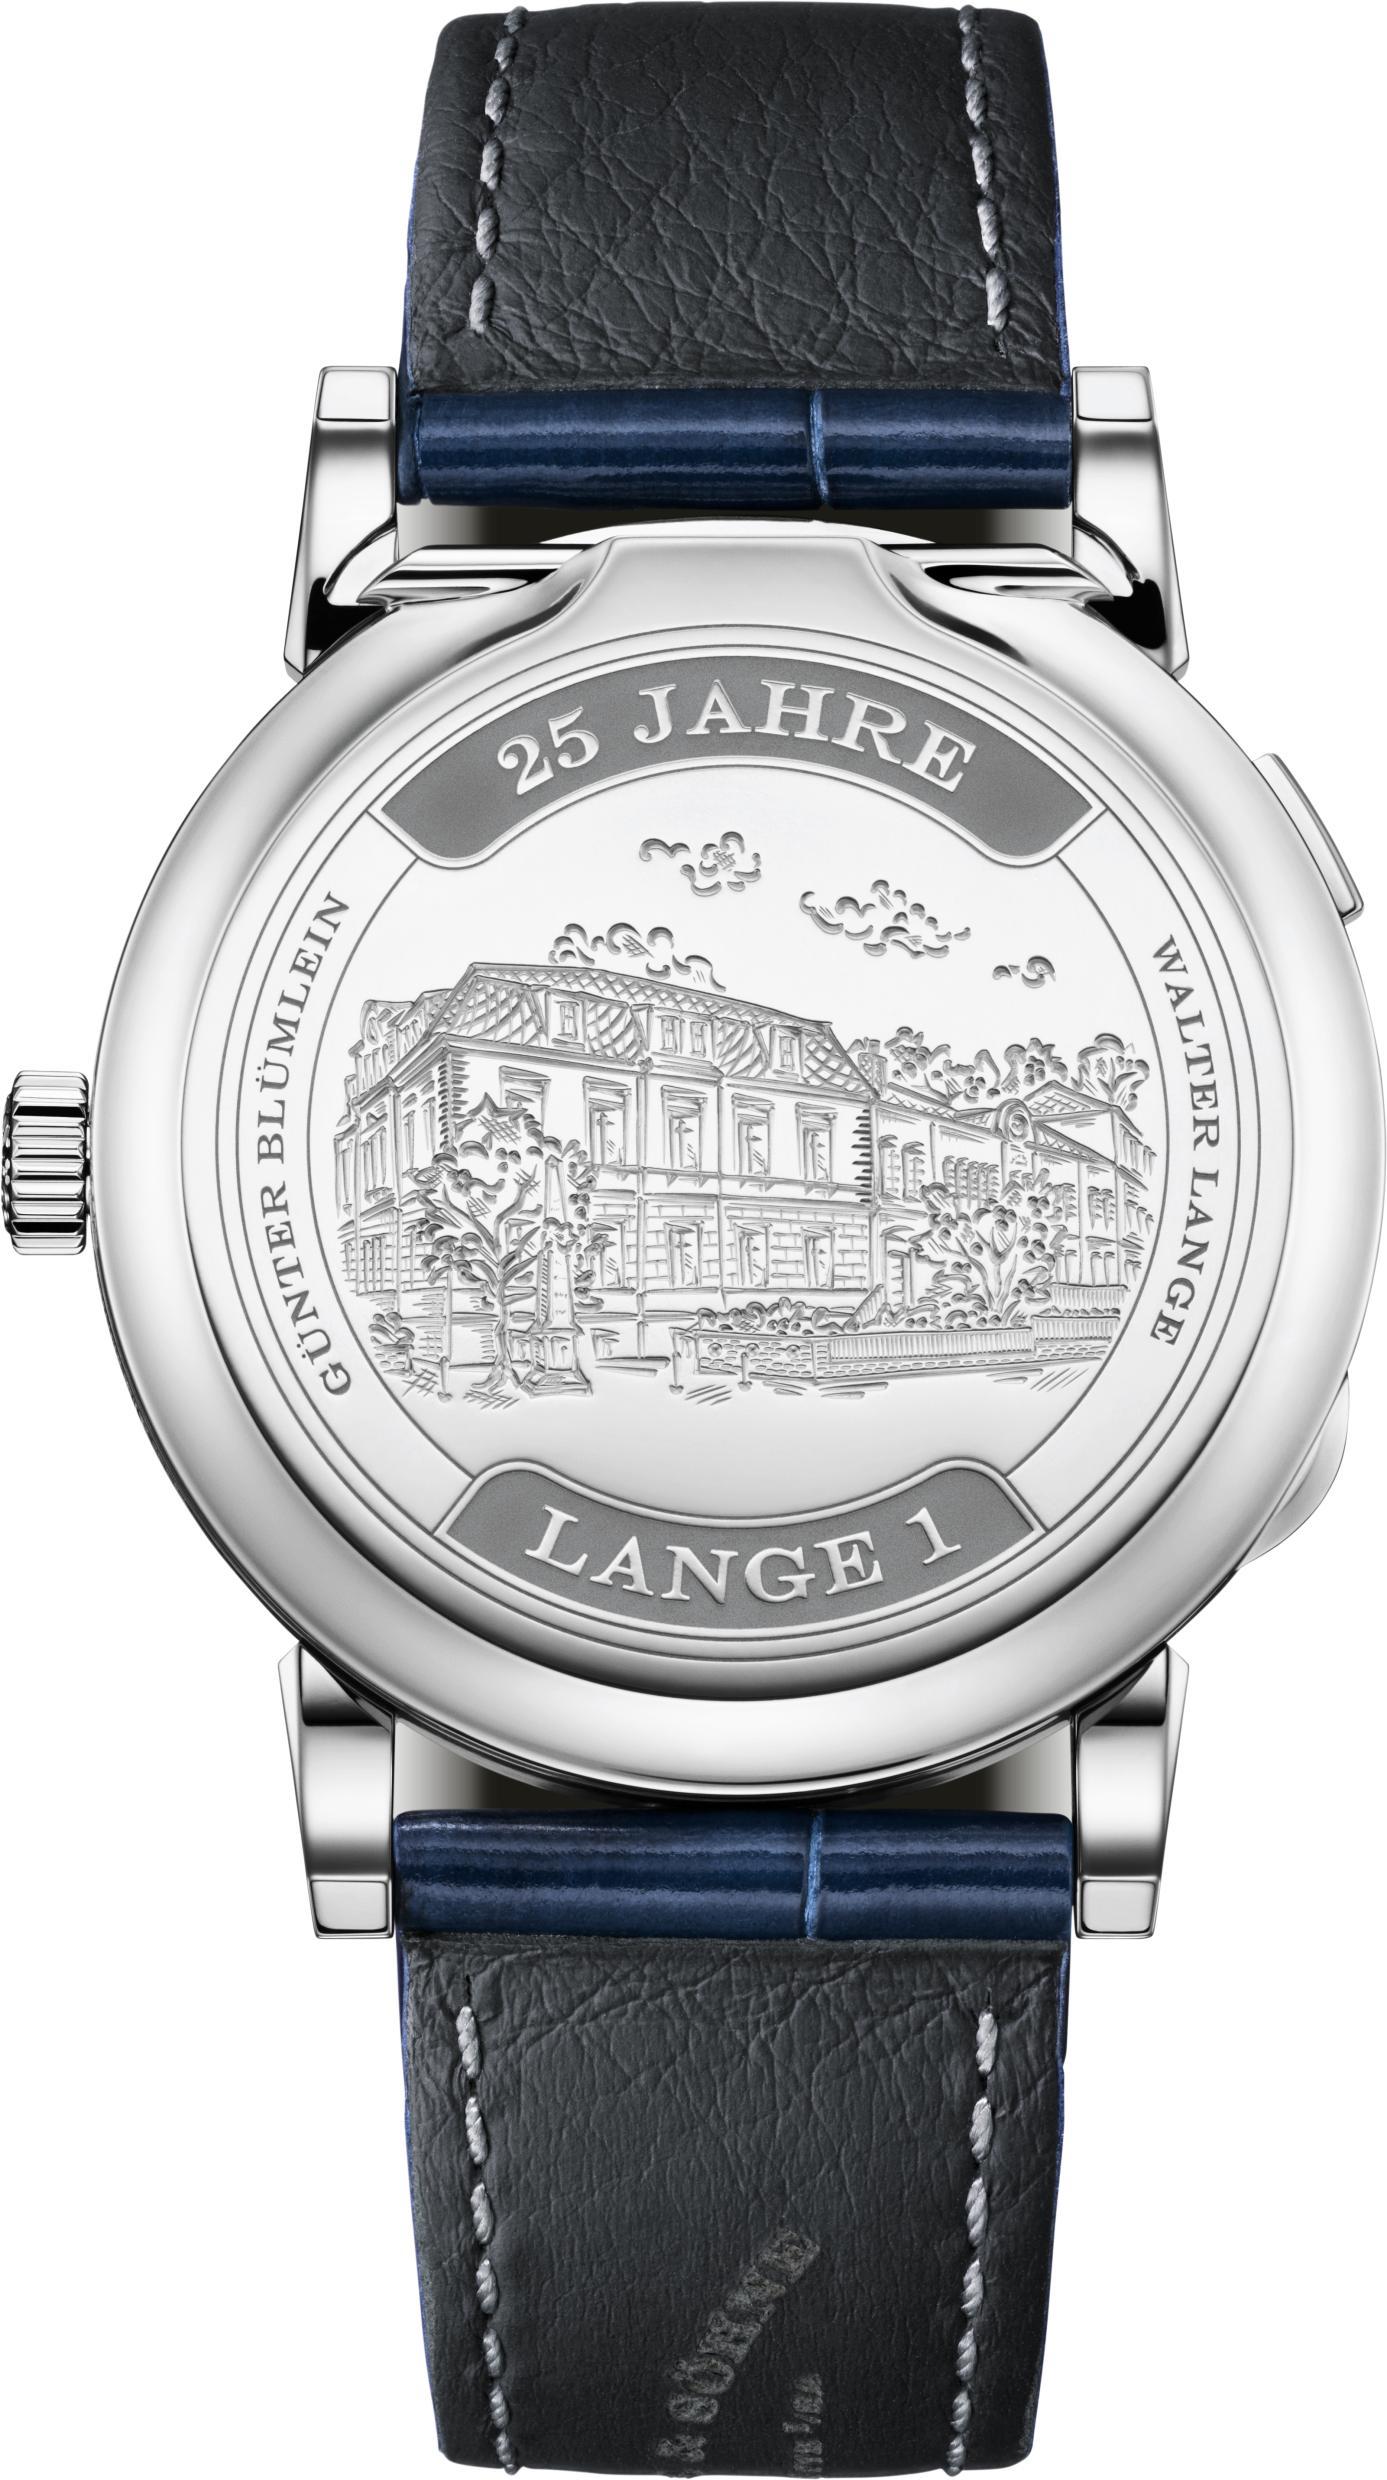 The A. Lange & Sohne Lange 1 25th Anniversary watch 